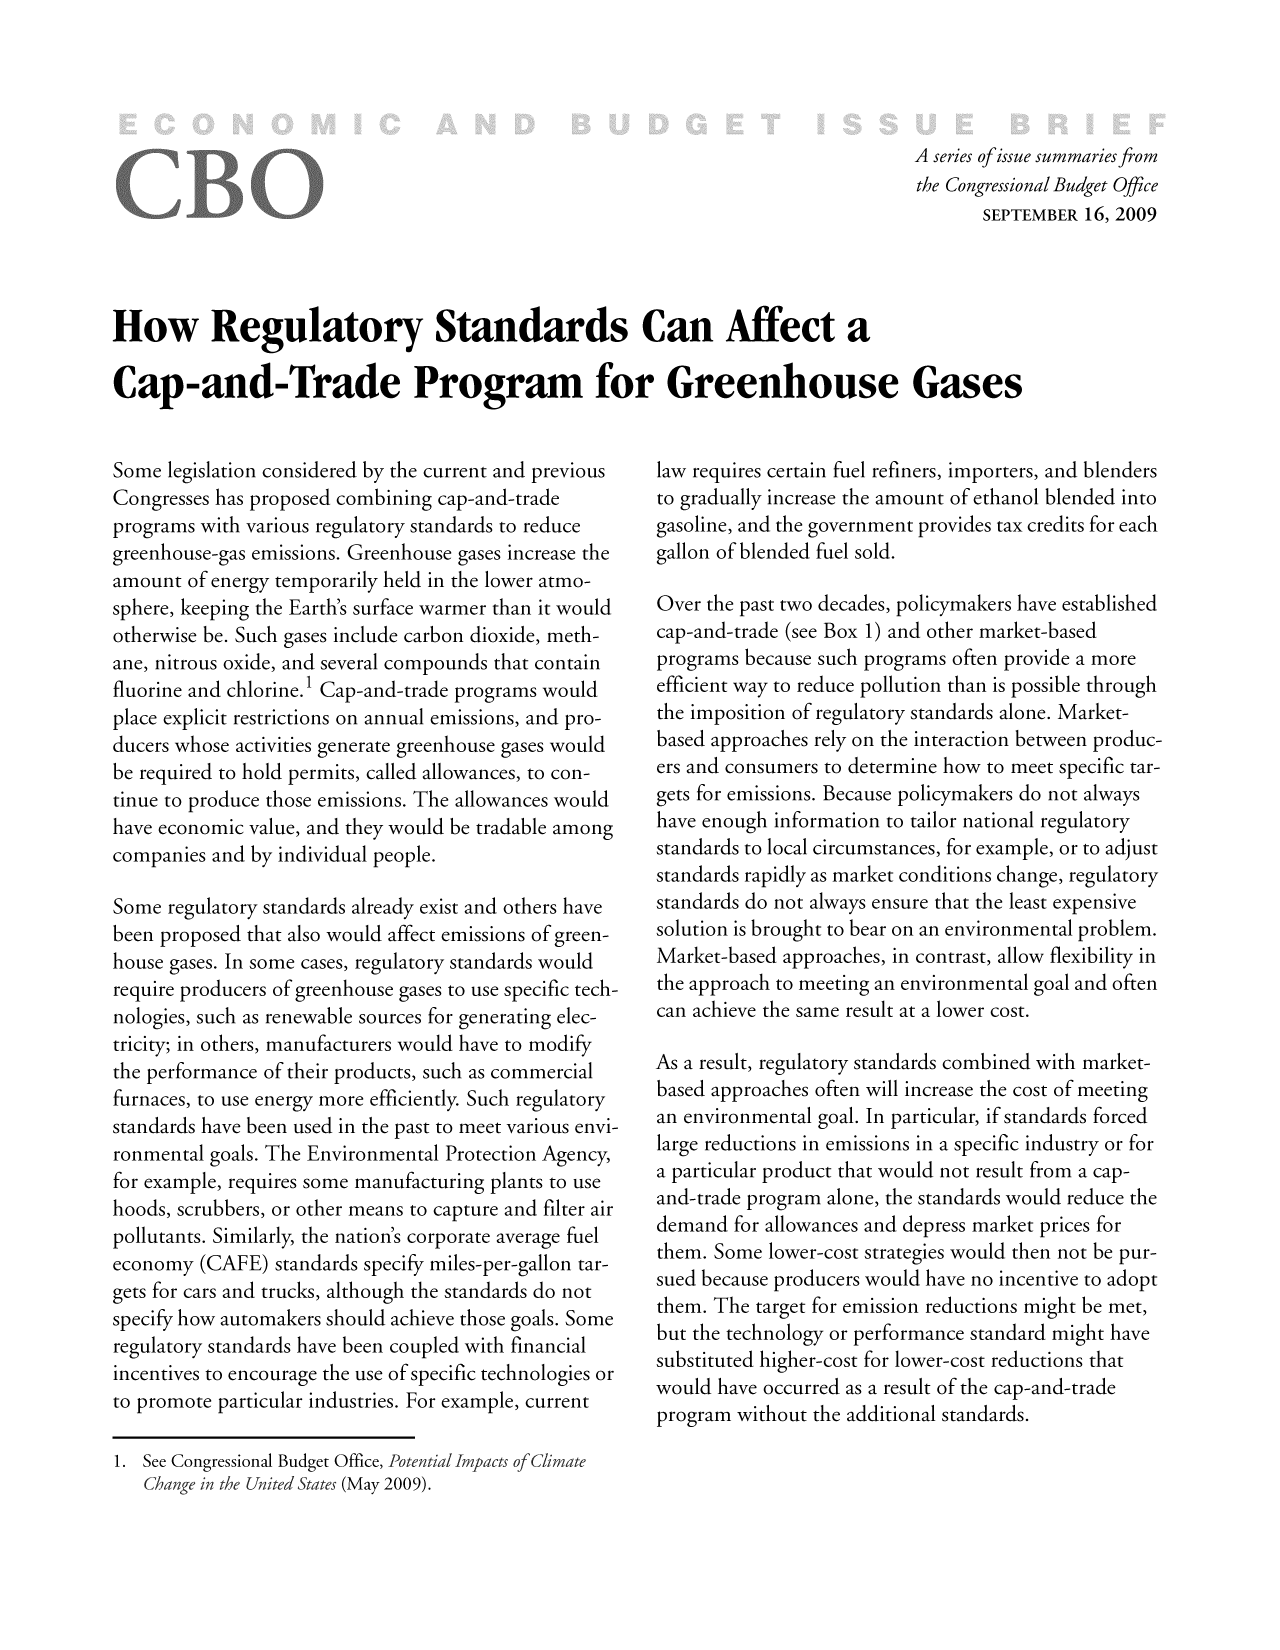 handle is hein.congrec/cbo8867 and id is 1 raw text is: A series ofissue summaries from
the Congressional Budget Office
SEPTEMBER 16, 2009

How Regulatory Standards Can Affect a
Cap-and-Trade Program for Greenhouse Gases

Some legislation considered by the current and previous
Congresses has proposed combining cap-and-trade
programs with various regulatory standards to reduce
greenhouse-gas emissions. Greenhouse gases increase the
amount of energy temporarily held in the lower atmo-
sphere, keeping the Earth's surface warmer than it would
otherwise be. Such gases include carbon dioxide, meth-
ane, nitrous oxide, and several compounds that contain
fluorine and chlorine.1 Cap-and-trade programs would
place explicit restrictions on annual emissions, and pro-
ducers whose activities generate greenhouse gases would
be required to hold permits, called allowances, to con-
tinue to produce those emissions. The allowances would
have economic value, and they would be tradable among
companies and by individual people.
Some regulatory standards already exist and others have
been proposed that also would affect emissions of green-
house gases. In some cases, regulatory standards would
require producers of greenhouse gases to use specific tech-
nologies, such as renewable sources for generating elec-
tricity; in others, manufacturers would have to modify
the performance of their products, such as commercial
furnaces, to use energy more efficiently. Such regulatory
standards have been used in the past to meet various envi-
ronmental goals. The Environmental Protection Agency,
for example, requires some manufacturing plants to use
hoods, scrubbers, or other means to capture and filter air
pollutants. Similarly, the nation's corporate average fuel
economy (CAFE) standards specify miles-per-gallon tar-
gets for cars and trucks, although the standards do not
specify how automakers should achieve those goals. Some
regulatory standards have been coupled with financial
incentives to encourage the use of specific technologies or
to promote particular industries. For example, current

law requires certain fuel refiners, importers, and blenders
to gradually increase the amount of ethanol blended into
gasoline, and the government provides tax credits for each
gallon of blended fuel sold.
Over the past two decades, policymakers have established
cap-and-trade (see Box 1) and other market-based
programs because such programs often provide a more
efficient way to reduce pollution than is possible through
the imposition of regulatory standards alone. Market-
based approaches rely on the interaction between produc-
ers and consumers to determine how to meet specific tar-
gets for emissions. Because policymakers do not always
have enough information to tailor national regulatory
standards to local circumstances, for example, or to adjust
standards rapidly as market conditions change, regulatory
standards do not always ensure that the least expensive
solution is brought to bear on an environmental problem.
Market-based approaches, in contrast, allow flexibility in
the approach to meeting an environmental goal and often
can achieve the same result at a lower cost.
As a result, regulatory standards combined with market-
based approaches often will increase the cost of meeting
an environmental goal. In particular, if standards forced
large reductions in emissions in a specific industry or for
a particular product that would not result from a cap-
and-trade program alone, the standards would reduce the
demand for allowances and depress market prices for
them. Some lower-cost strategies would then not be pur-
sued because producers would have no incentive to adopt
them. The target for emission reductions might be met,
but the technology or performance standard might have
substituted higher-cost for lower-cost reductions that
would have occurred as a result of the cap-and-trade
program without the additional standards.

1. See Congressional Budget Office, Potenti
Change in the United States (May 2009).


